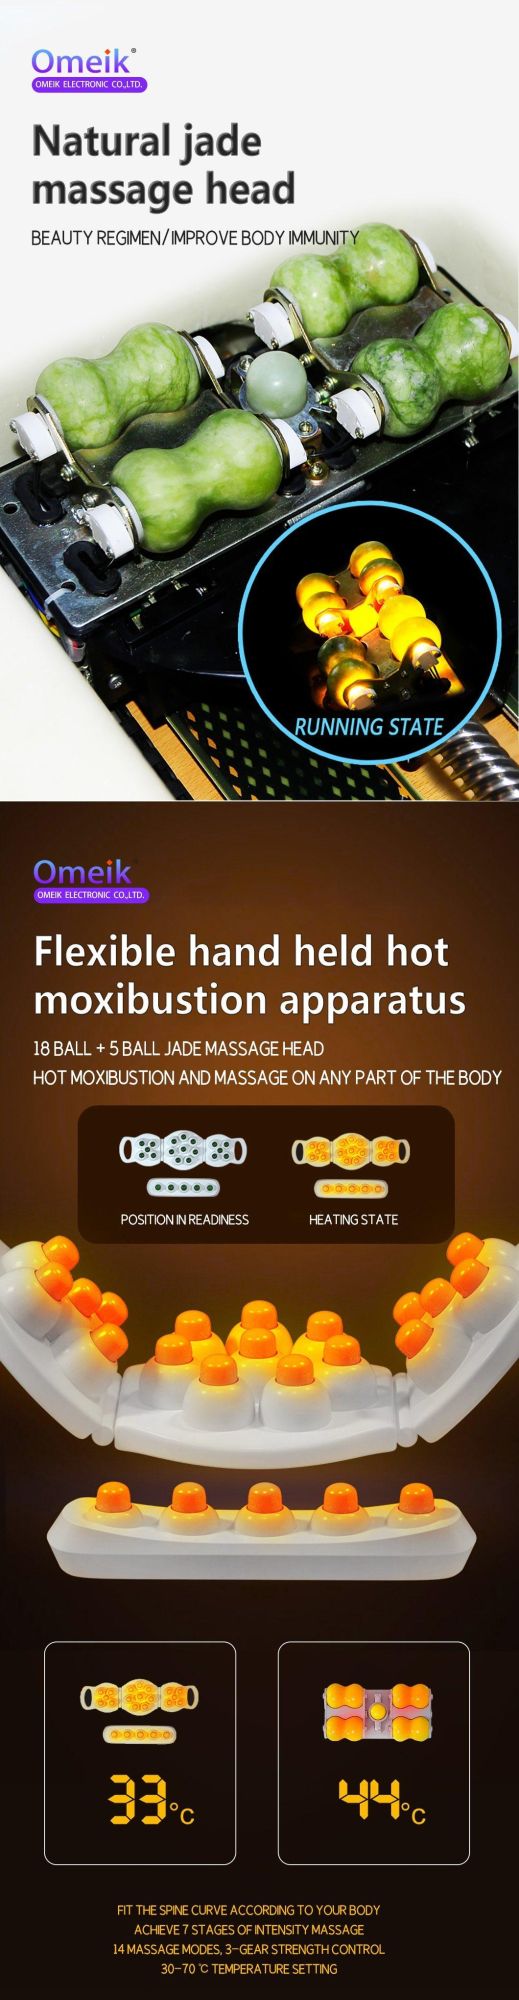 Multi Function Health Whole Body Thermal Relax 3D Massage Chair Therapy Jade Stone Roller Massage Bed